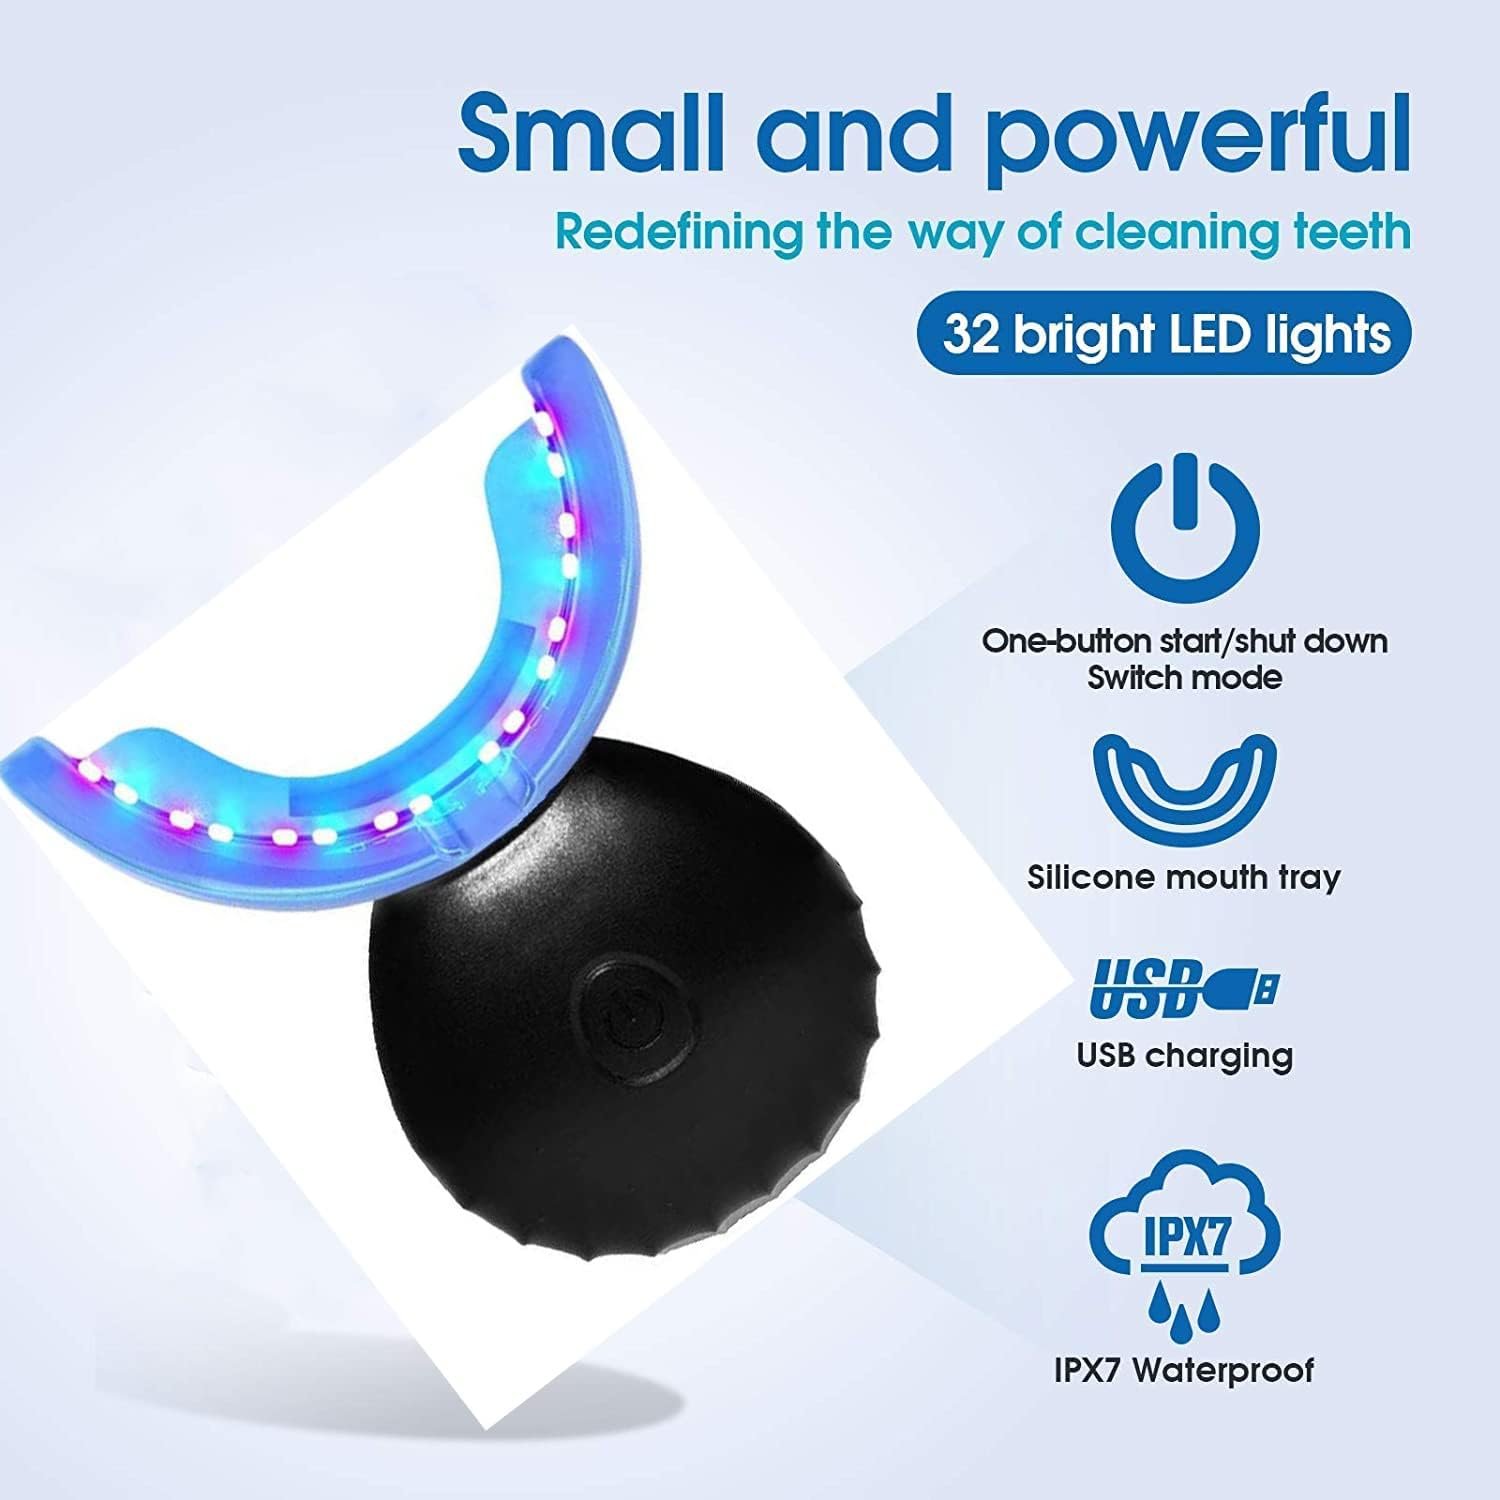 koouood Tooth Whitening Instrument 32LED Induction Rechargeable Tooth Whitening System Tooth Bleaching Light Accelerated Bleaching Tray Kit containing 16 Powerful red and Blue LED Lights (Black)